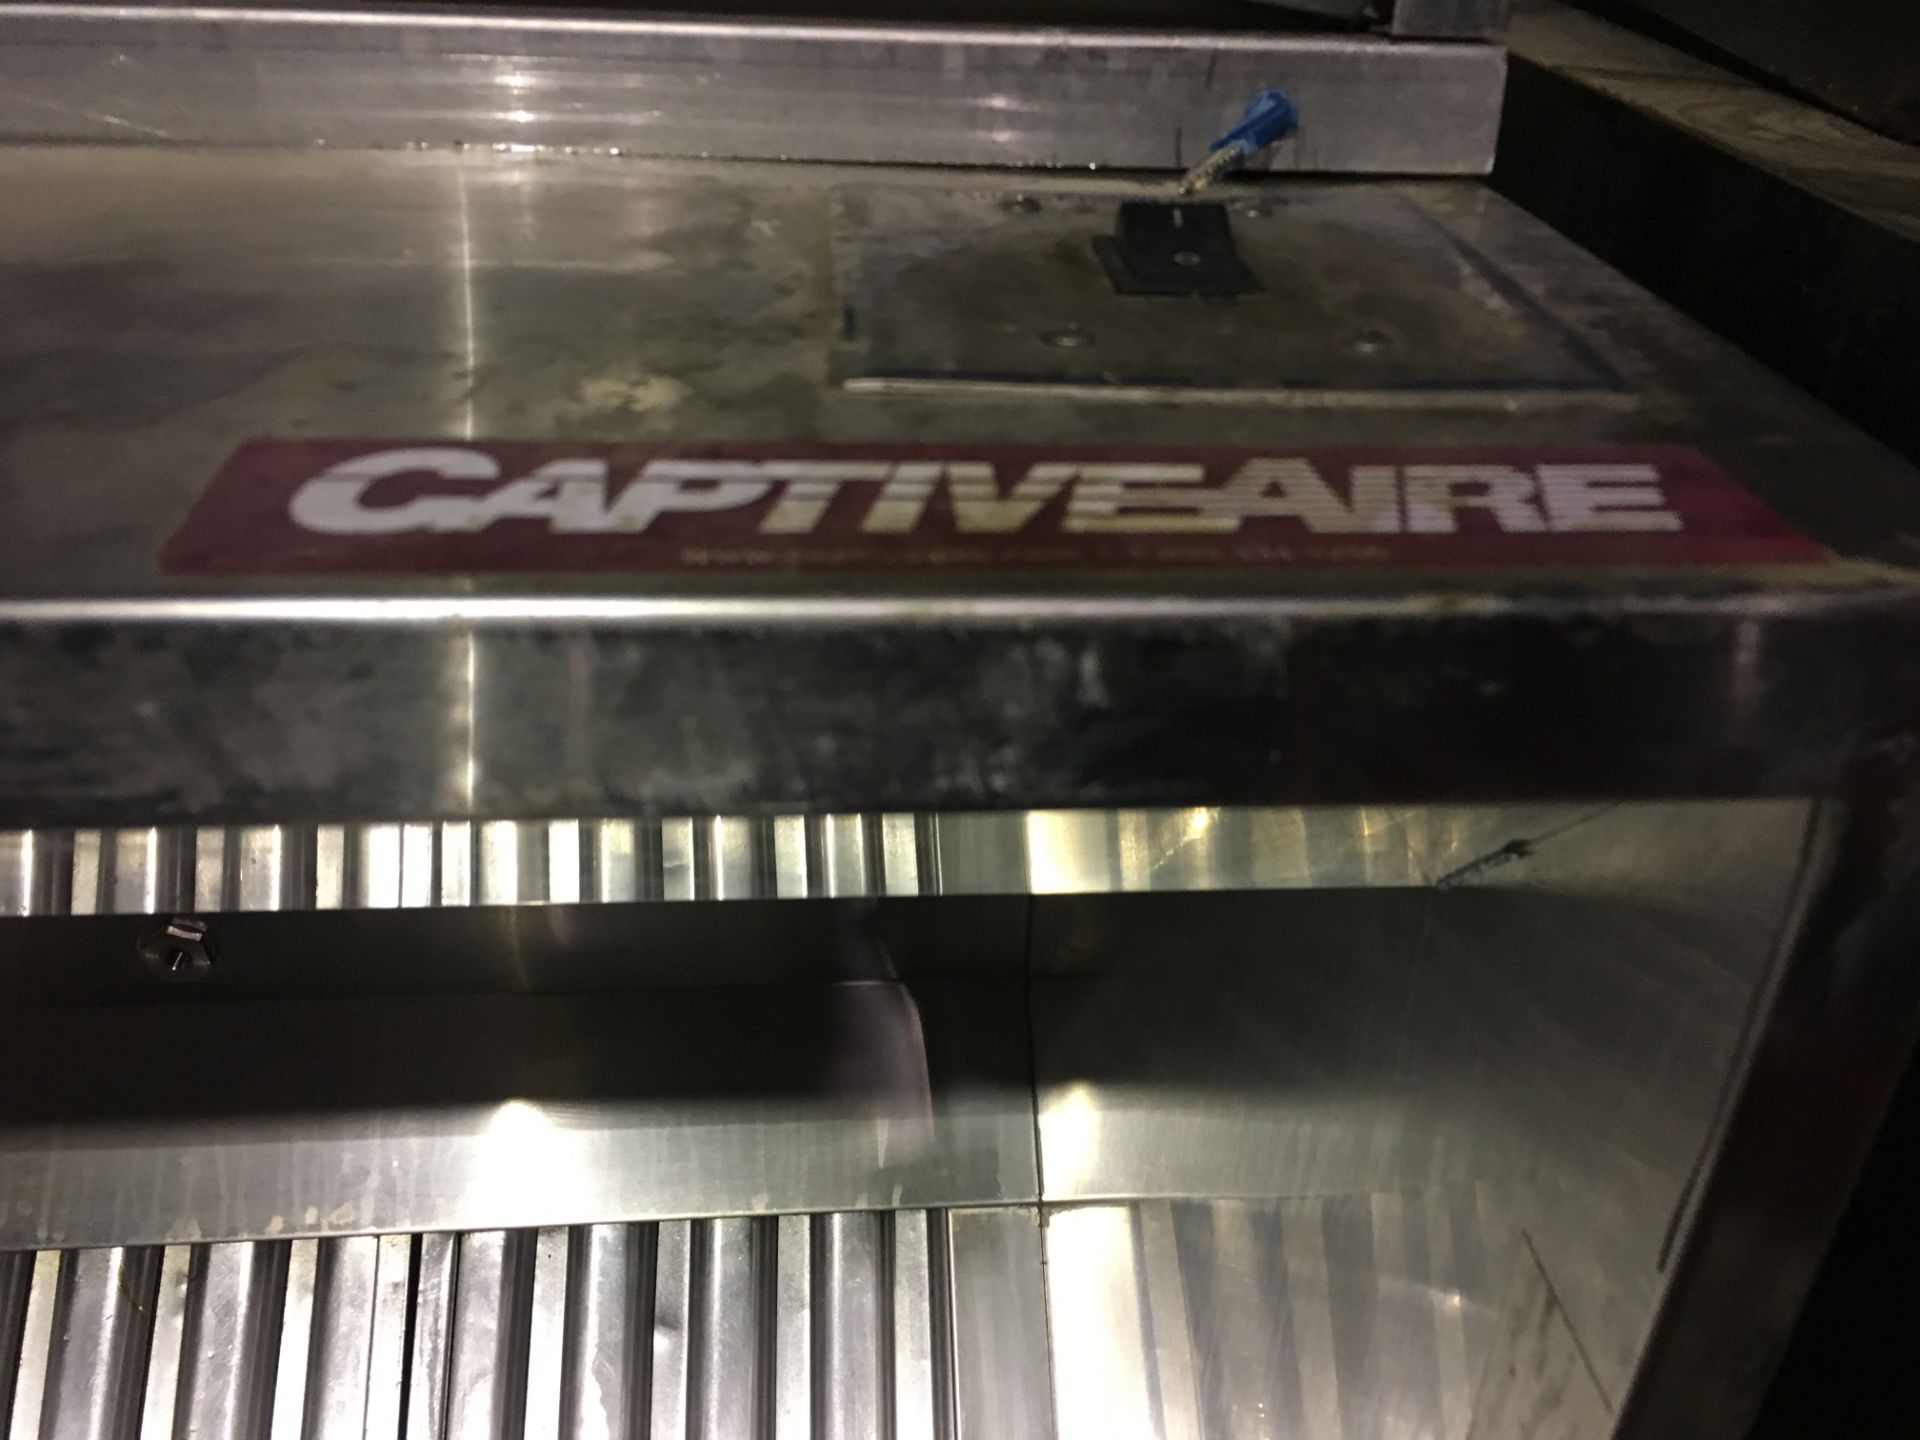 Captive Aire 7' x 32" S/S Exhaust Canopy - Image 3 of 5